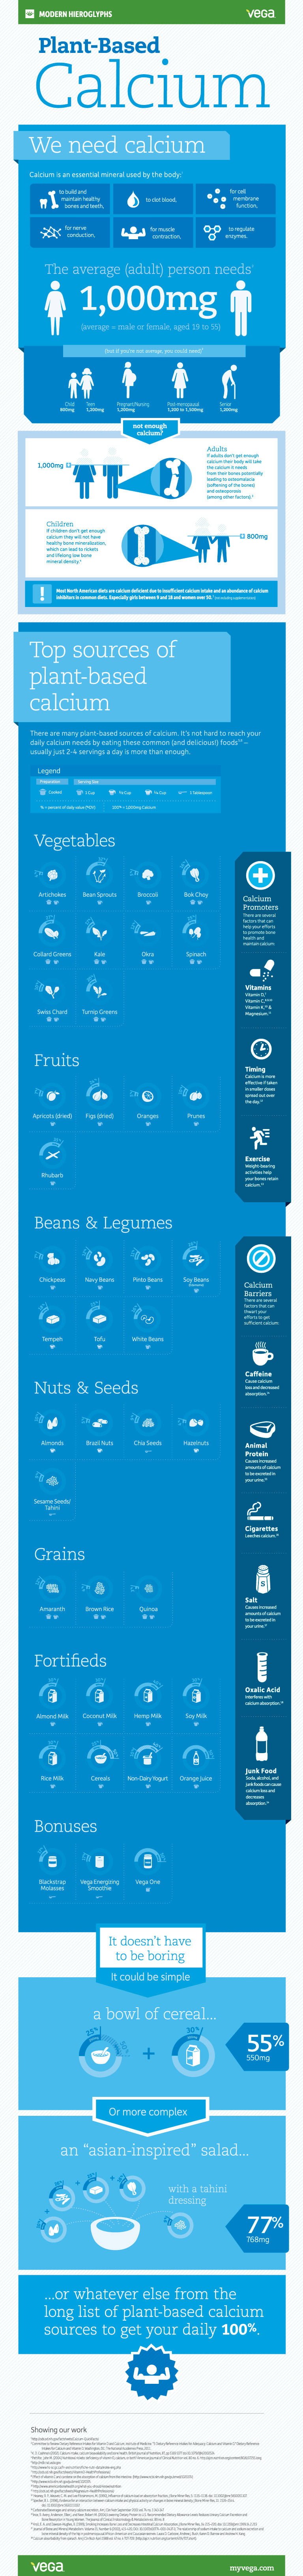 Plant Based Sources of Calcium Infographic